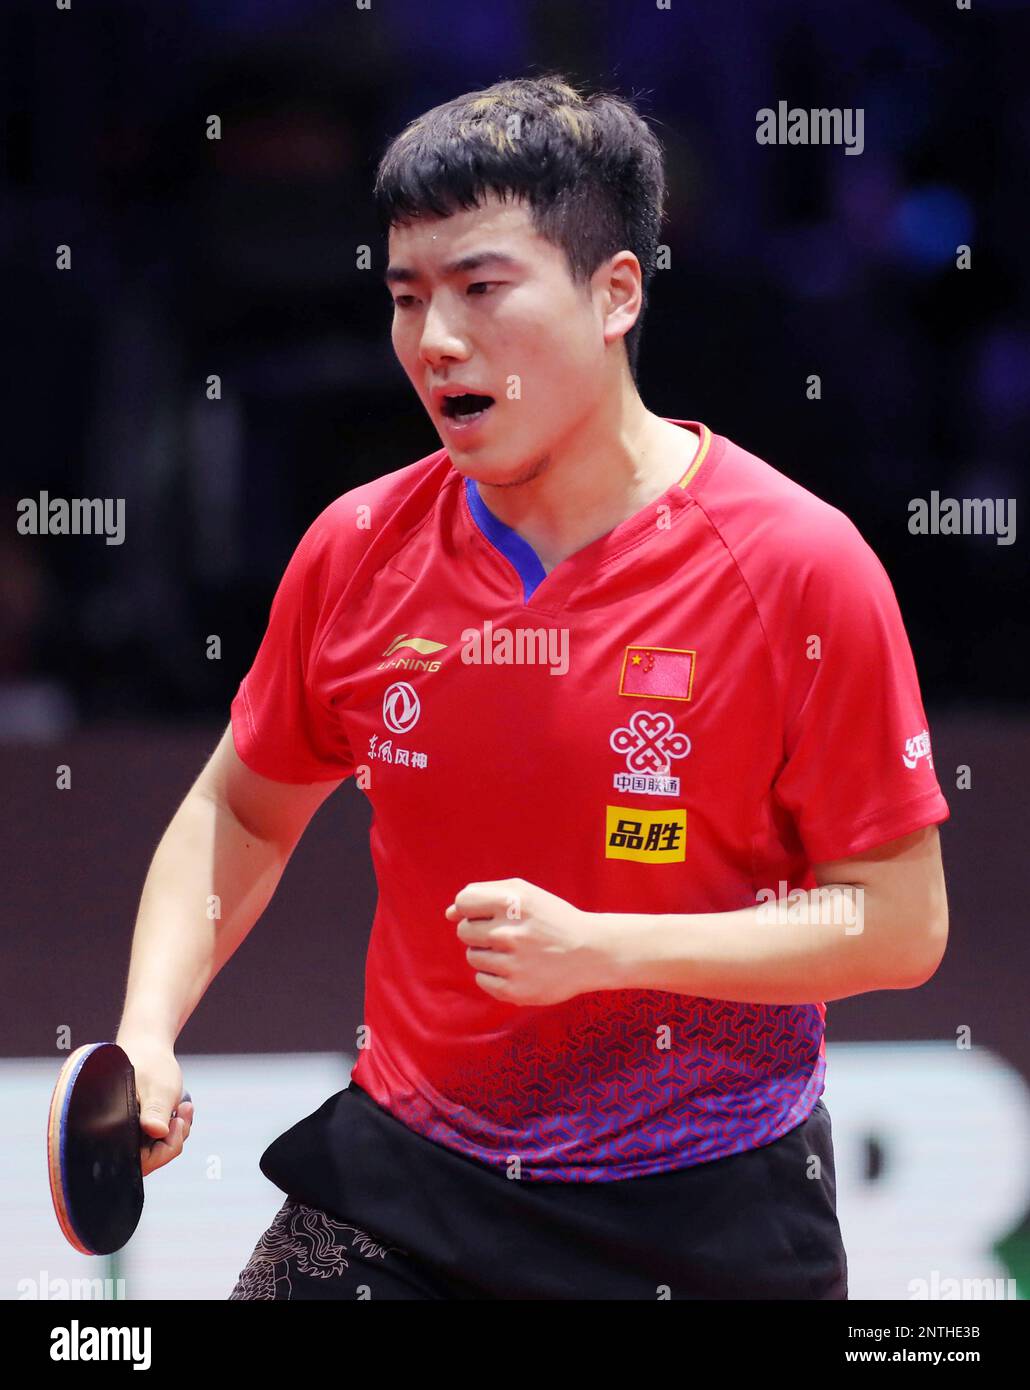 China's Ma Long celebrates after scoring during men's singles semifinal  match of Liebherr 2019 ITTF World Table Tennis Championships against  China's Liang Jingkun in Budapest, Hungary on April 27, 2019. Ma Long